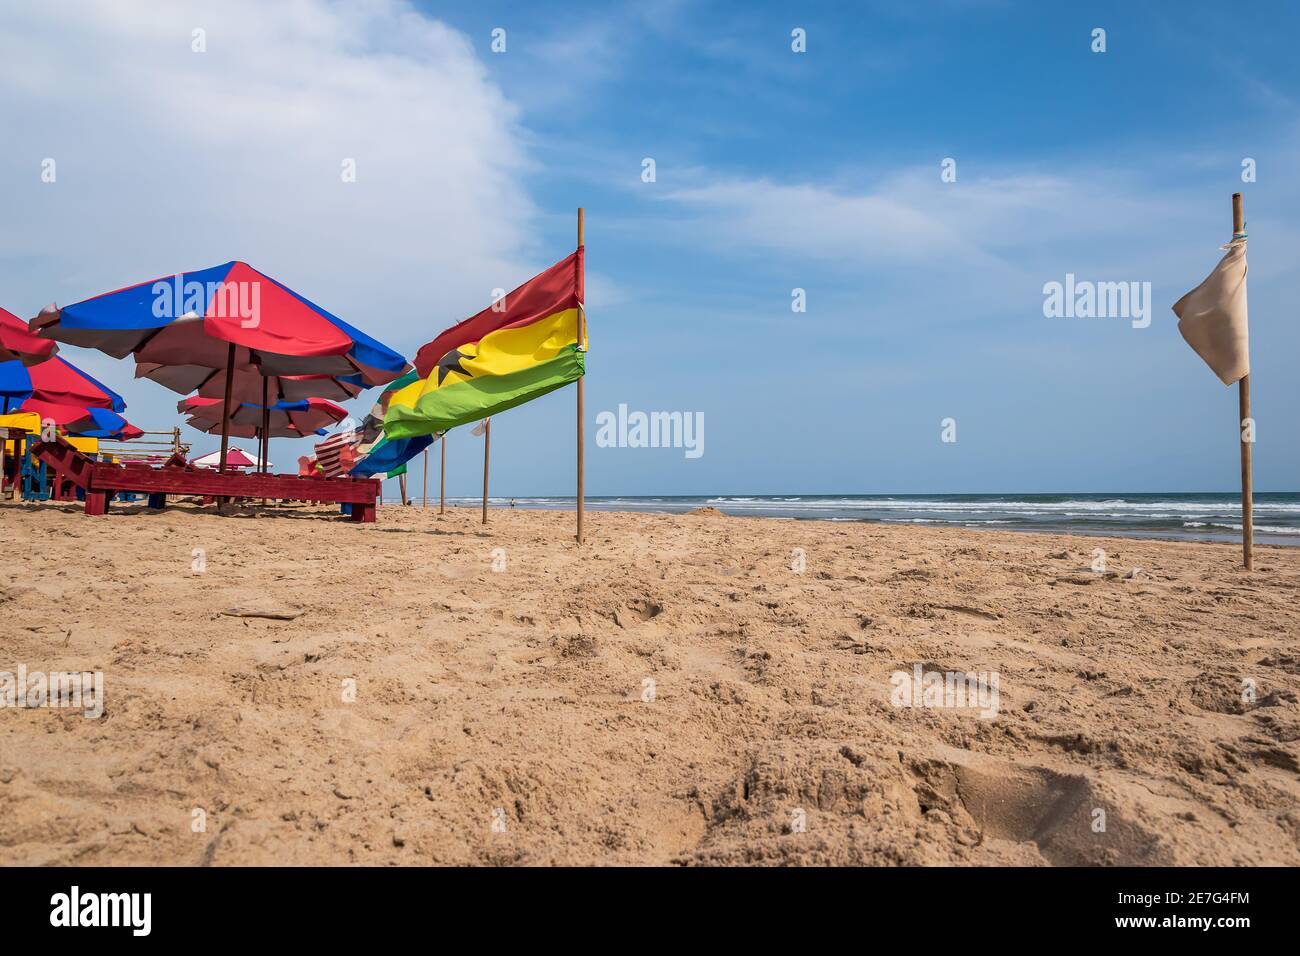 A beach without tourists and with flags from different countries Accra Ghana West Africa Stock Photo